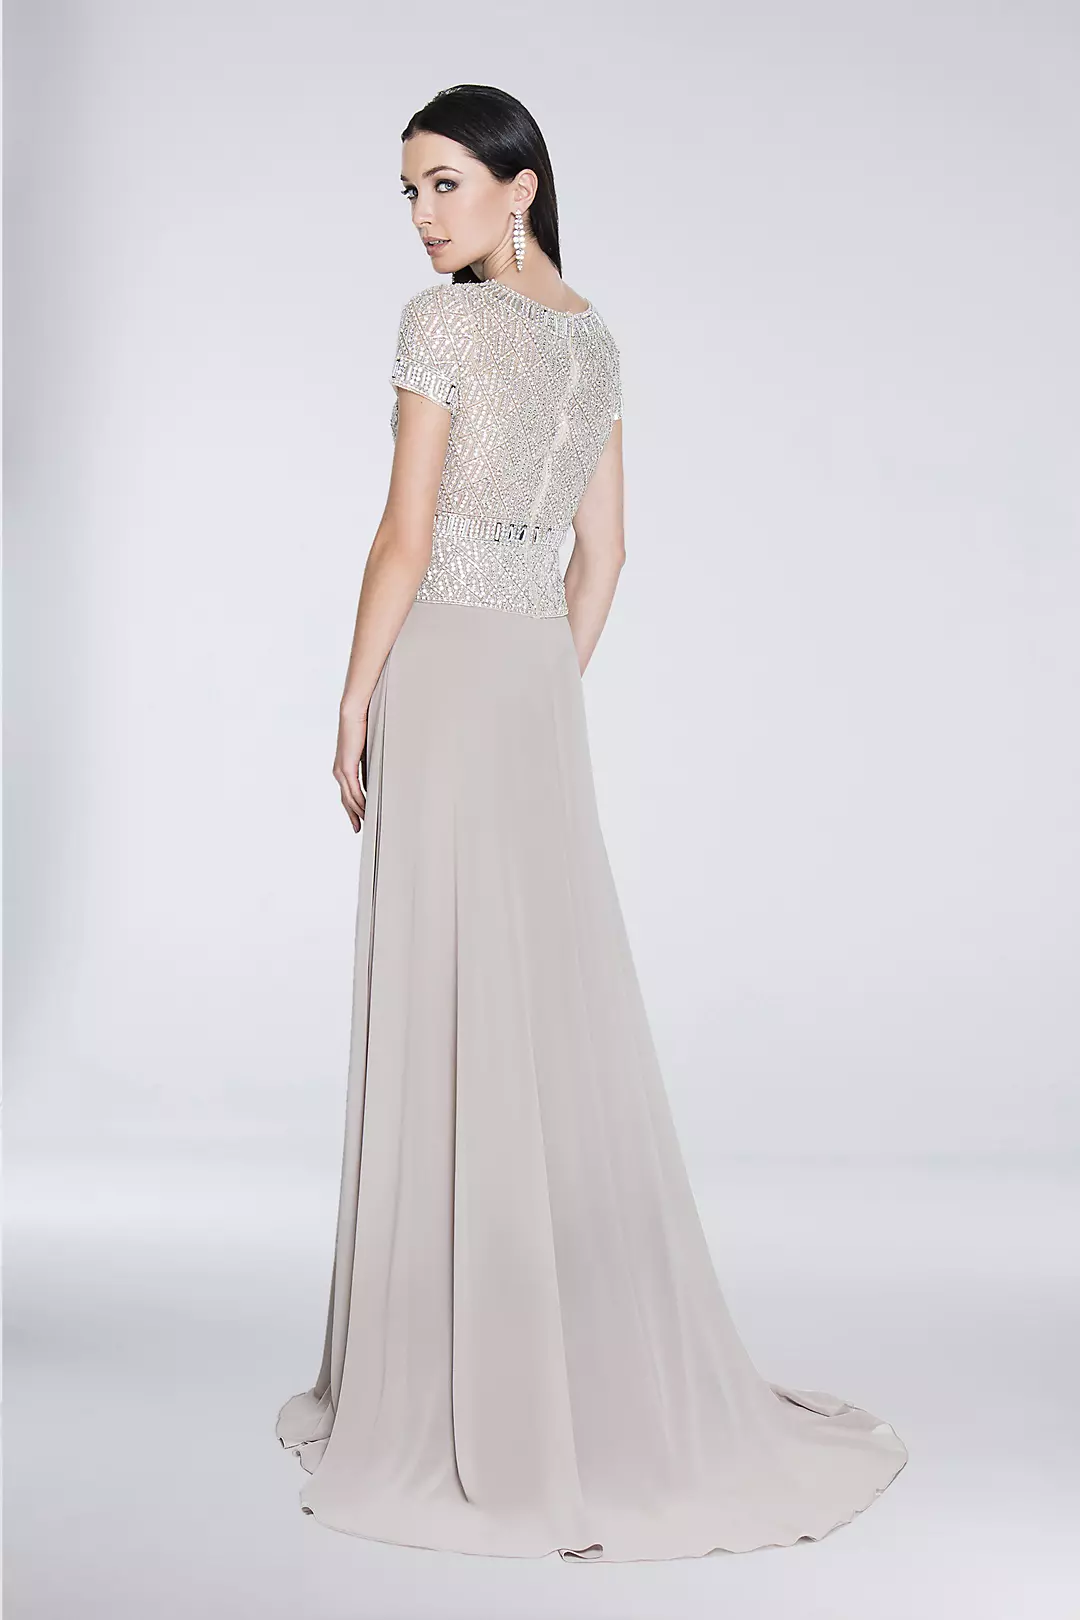 Jewel-Encrusted Short Sleeve Chiffon A-Line Gown Image 2